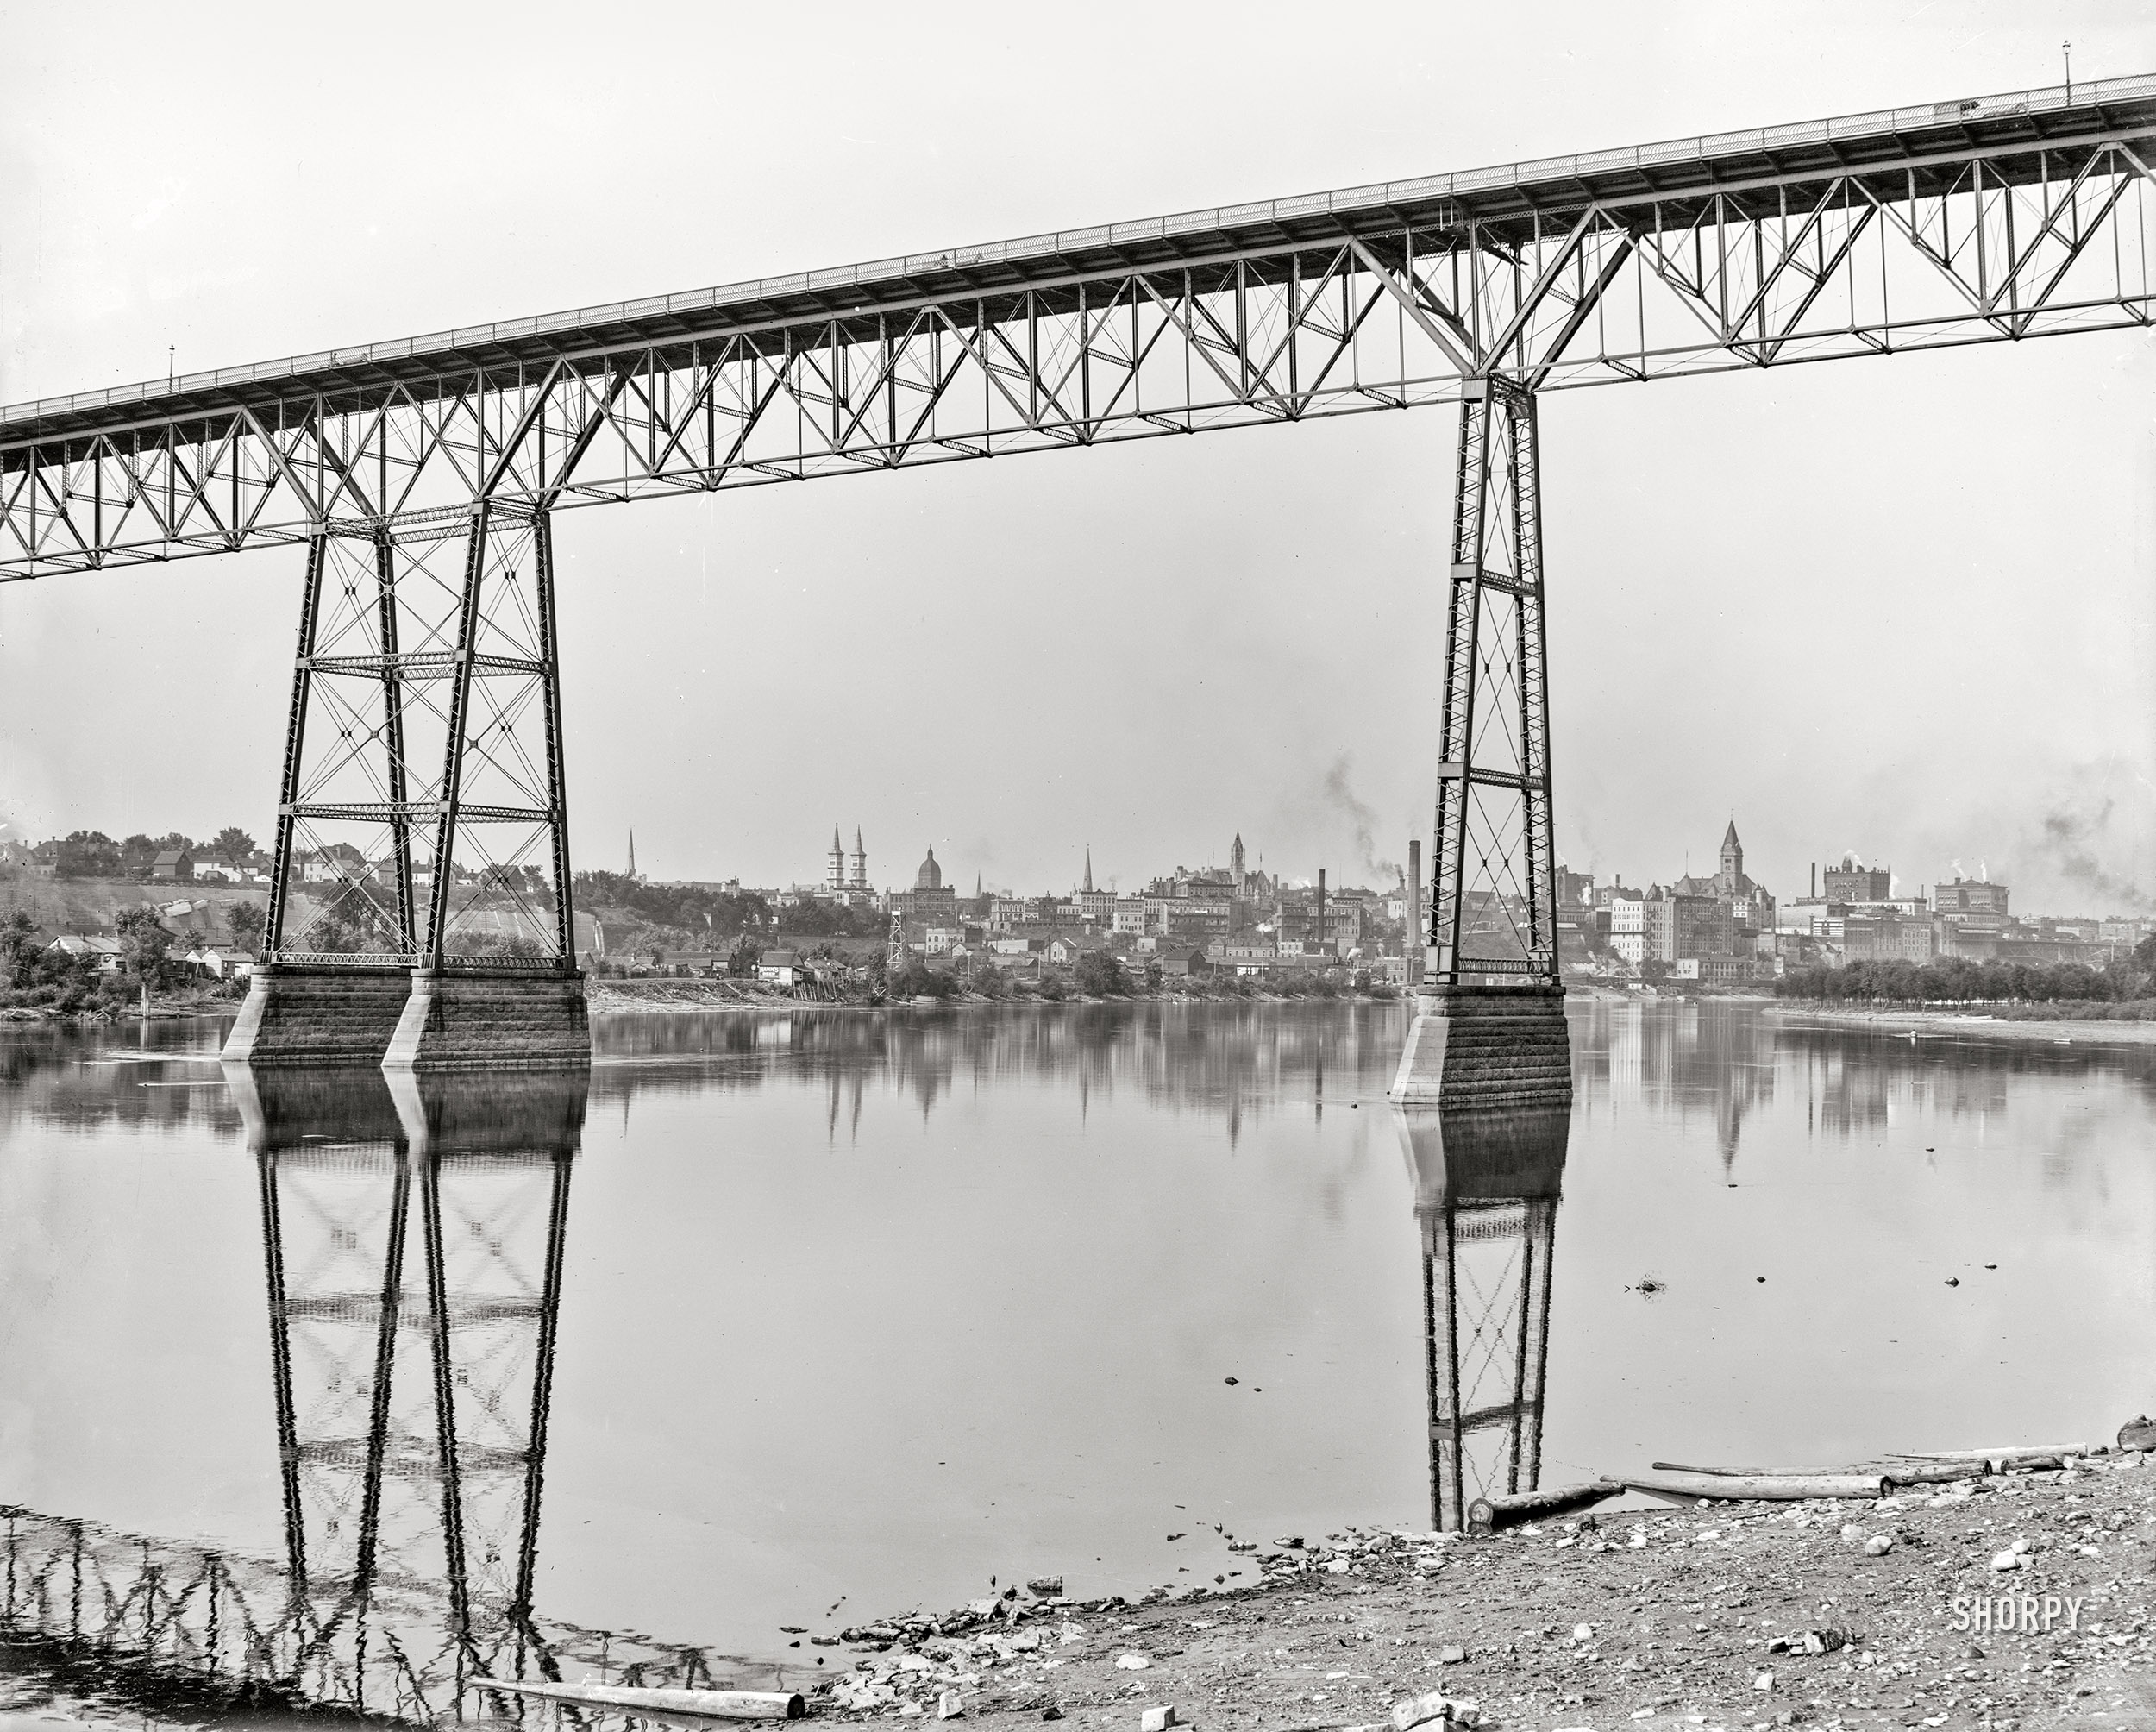 1905. "St. Paul and Mississippi River from under High Bridge." 8x10 inch dry plate glass negative, Detroit Photographic Company. View full size.